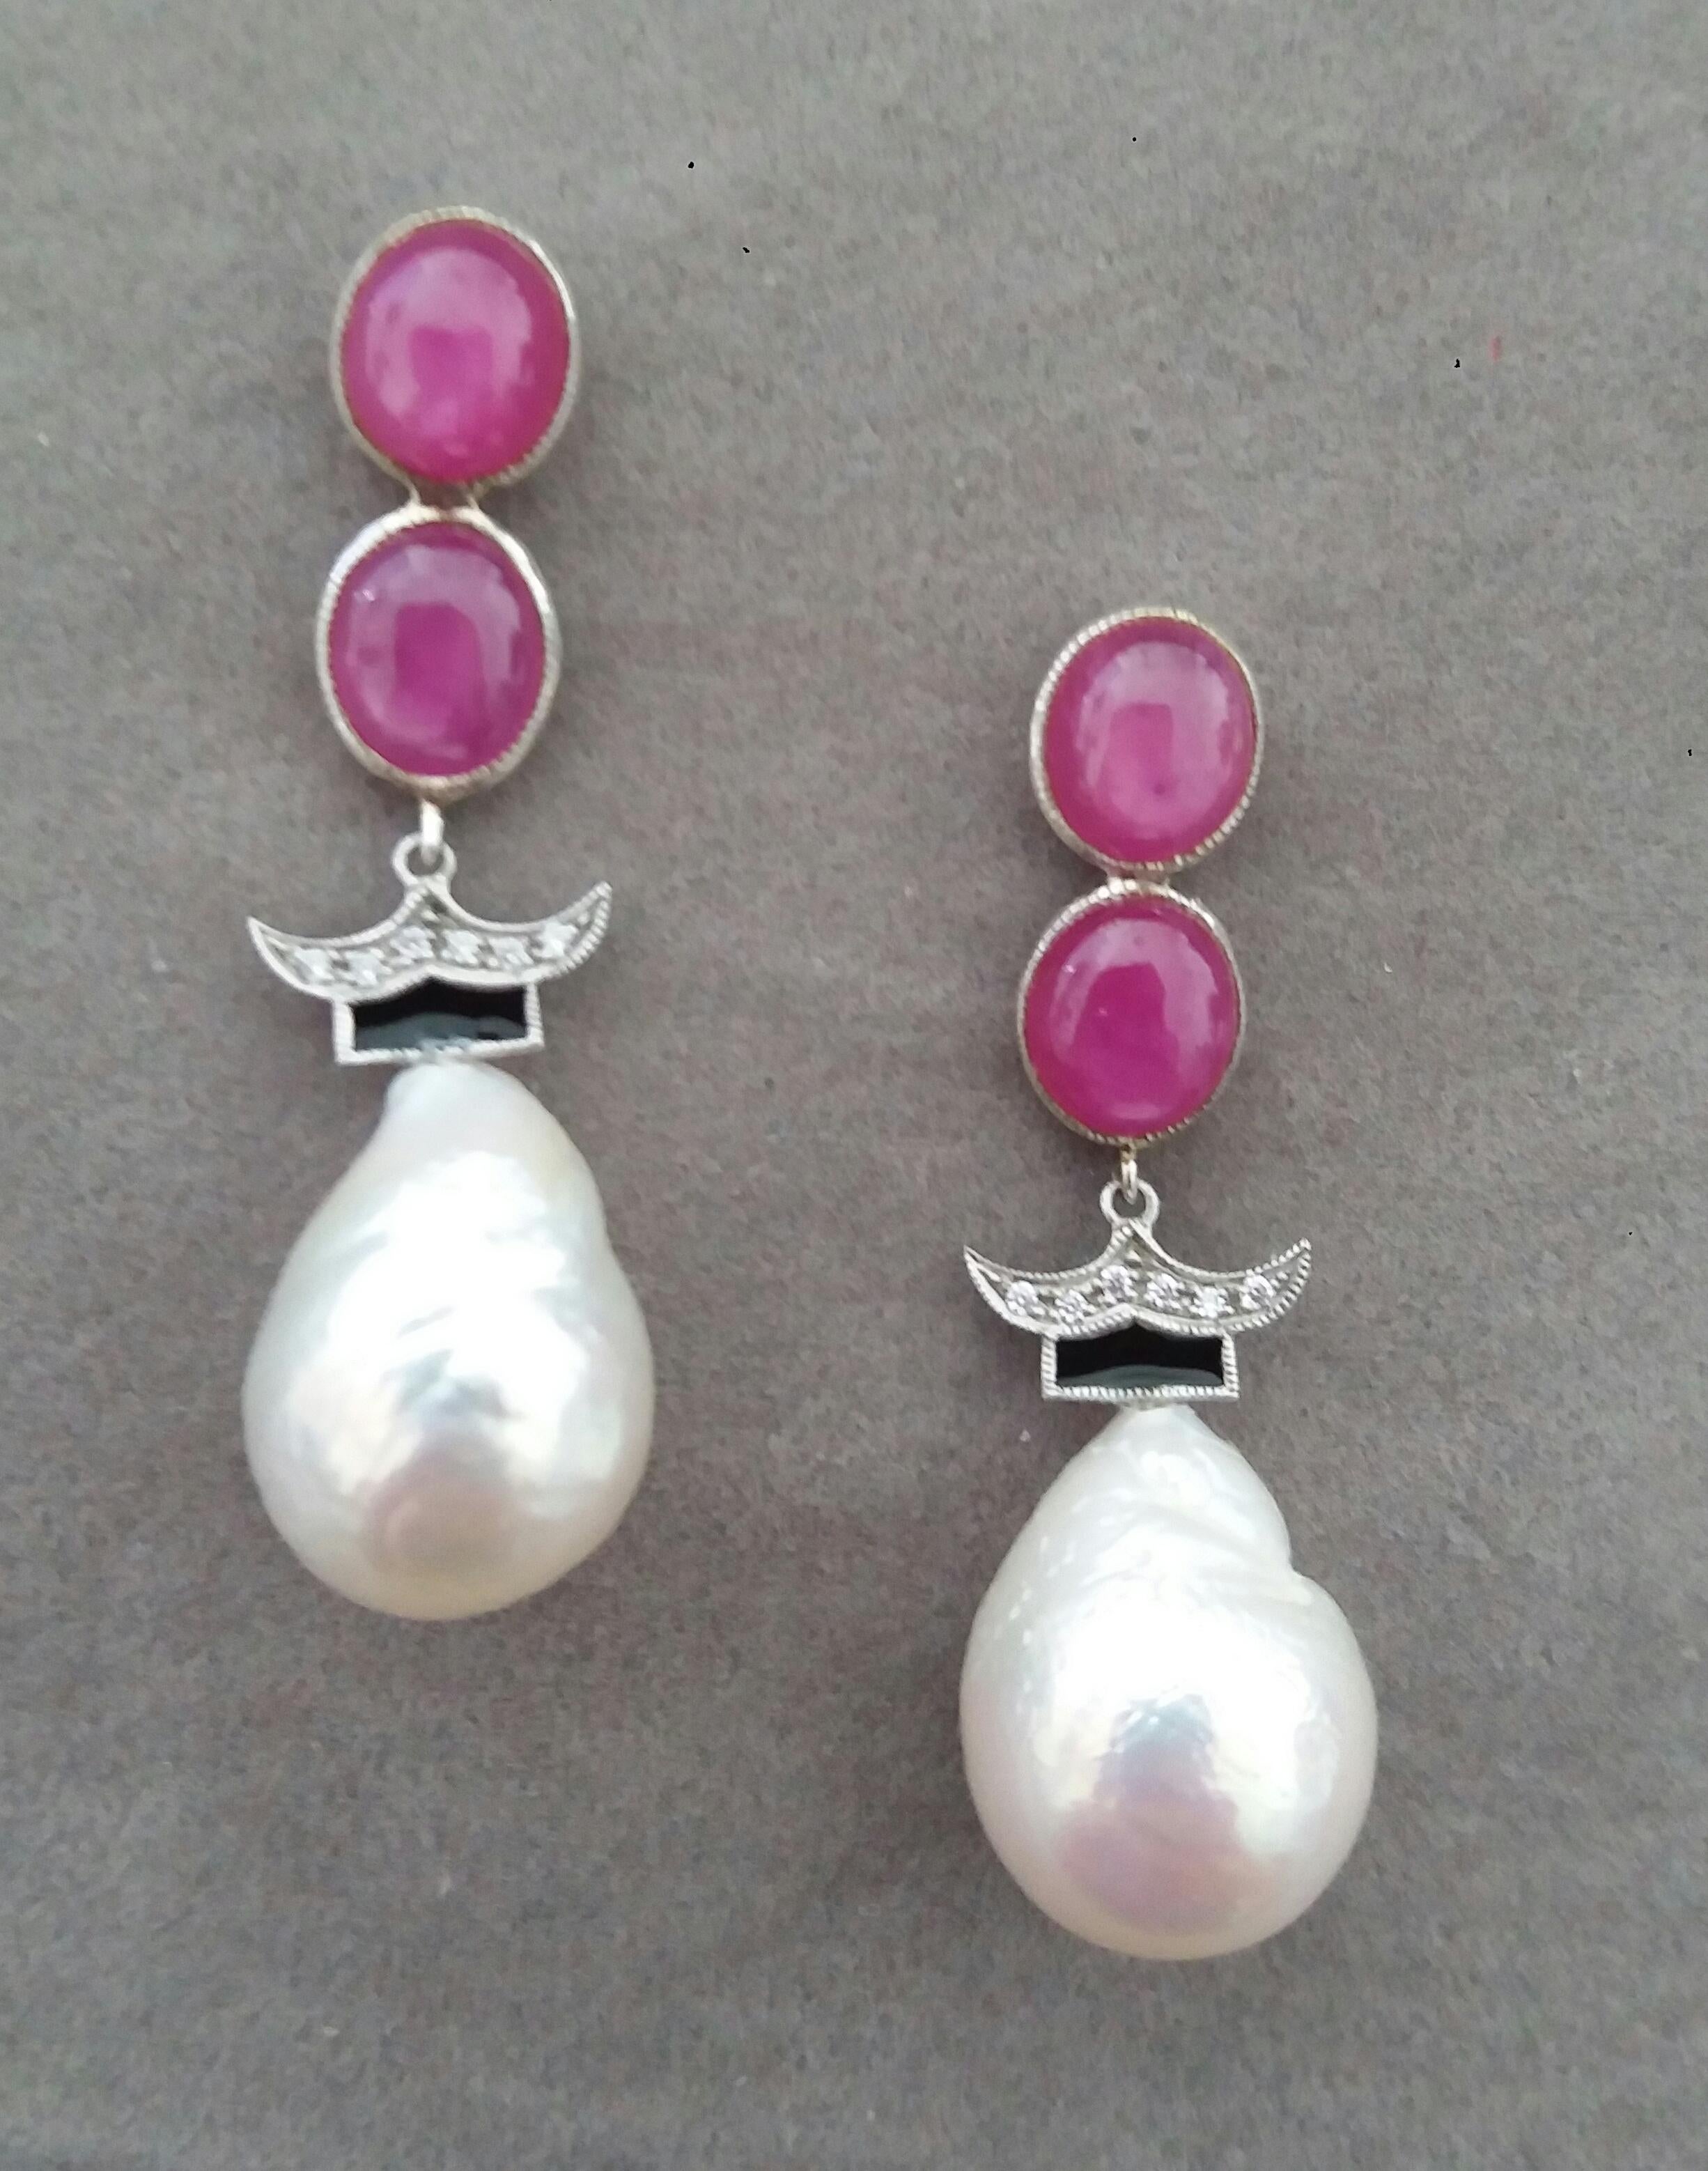 In these Classic Art Deco Style the tops parts have 4  ruby oval cabochons size 6x8 mm and a white gold element with 14 diamonds and black enamel , finally the bottom parts  are  composed of 2 white  baroque pearls measuring  13 x17  mm. 

In 1978